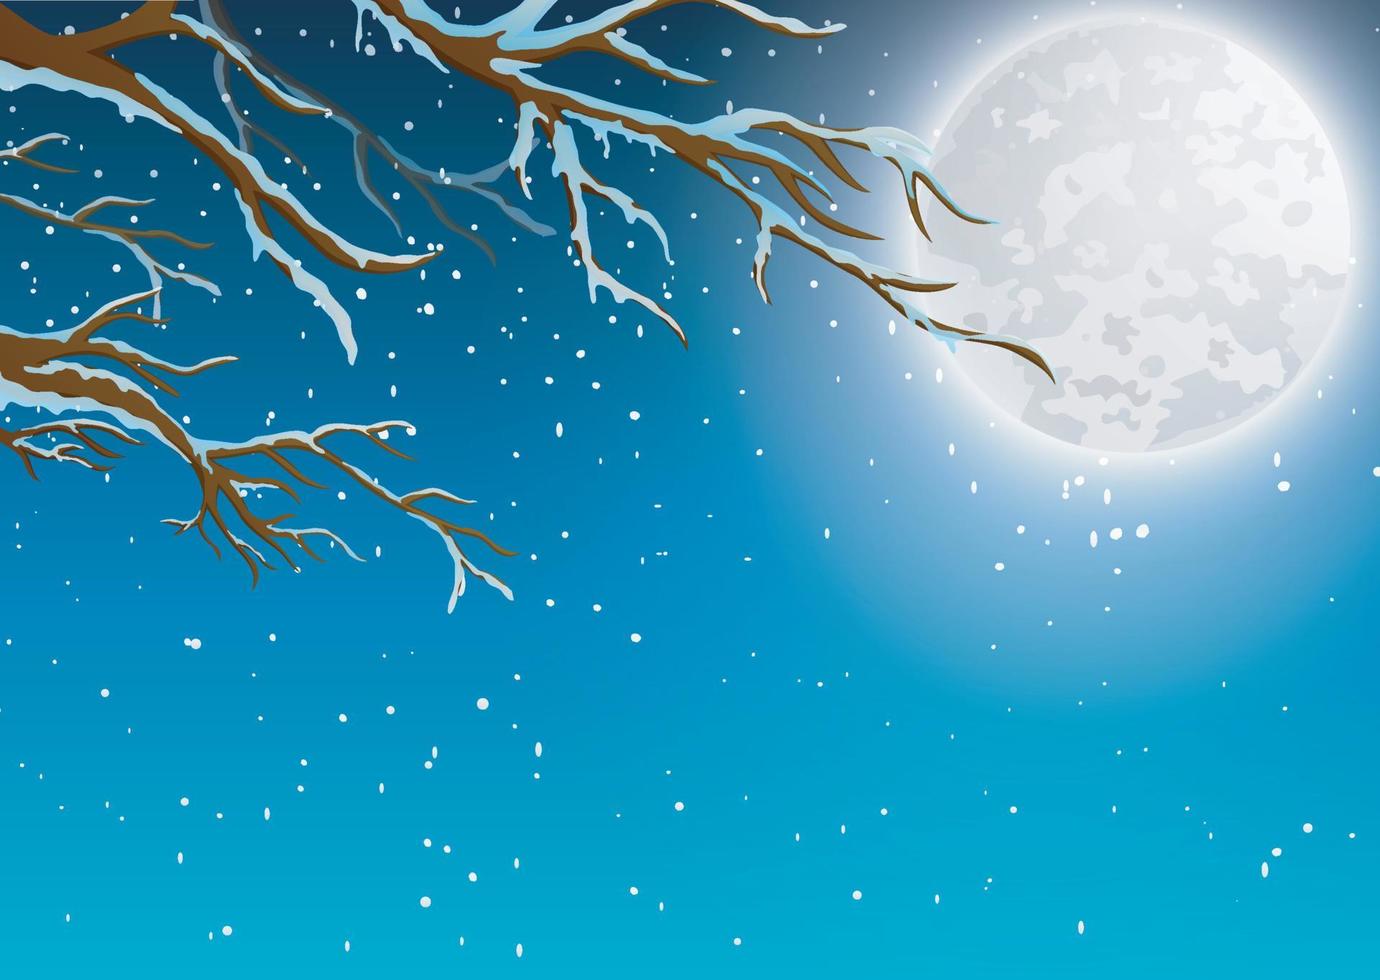 Winter background with tree branch and moonlight vector